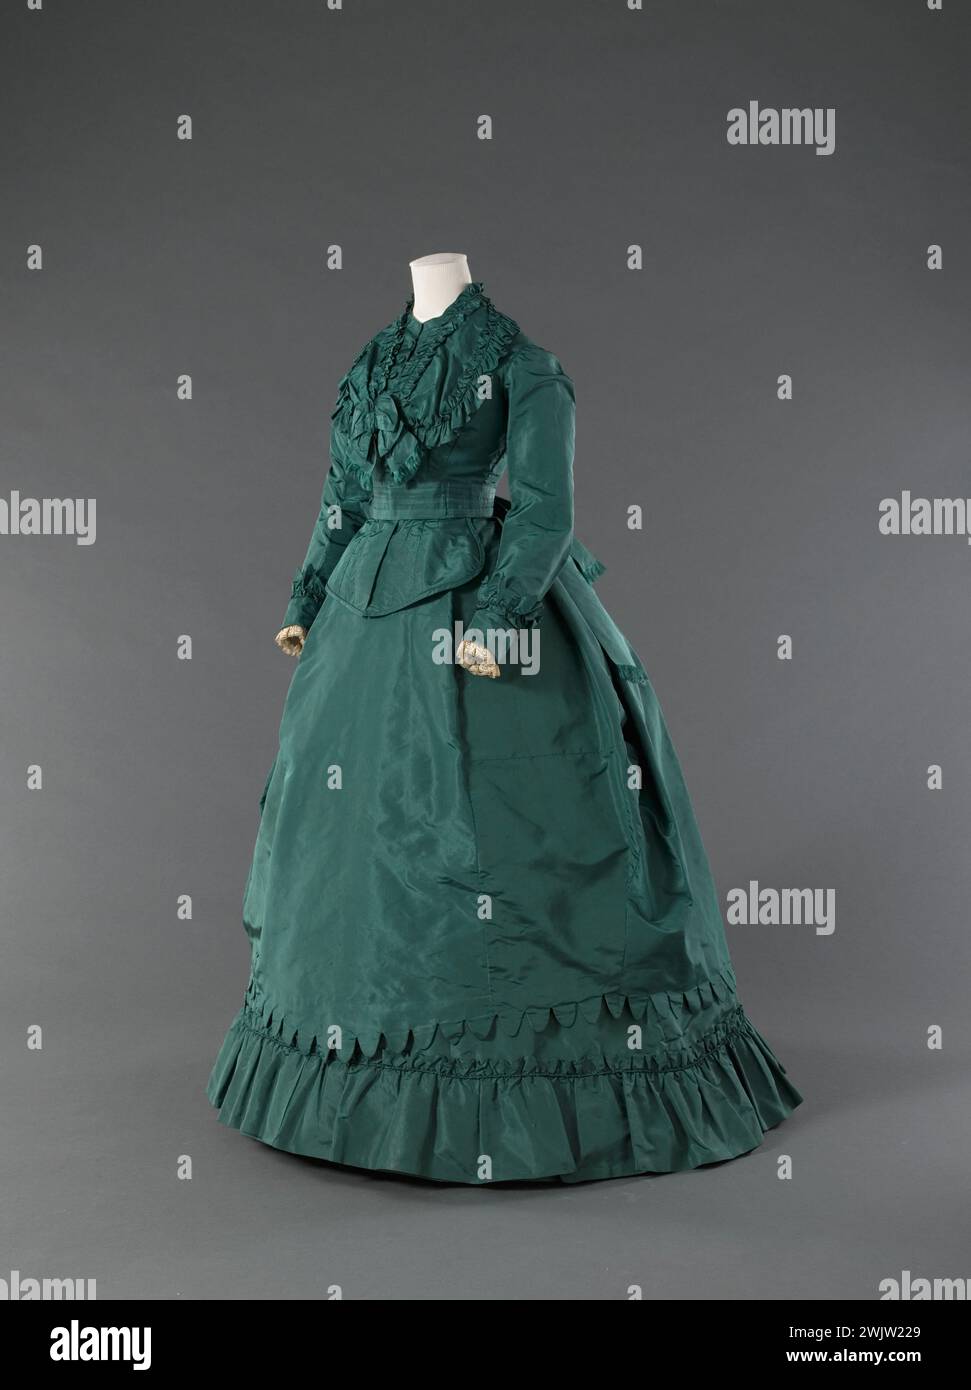 Day dress (5 pieces) - 'Small costume'. Green fault, Worth & Bobergh claw, 7 rue de la Paix, Paris. 1869. Galliera, fashion museum of the city of Paris. 37925-1 Five, feminine, claw, female model, small suit, day dress, second empire, green, part Stock Photo